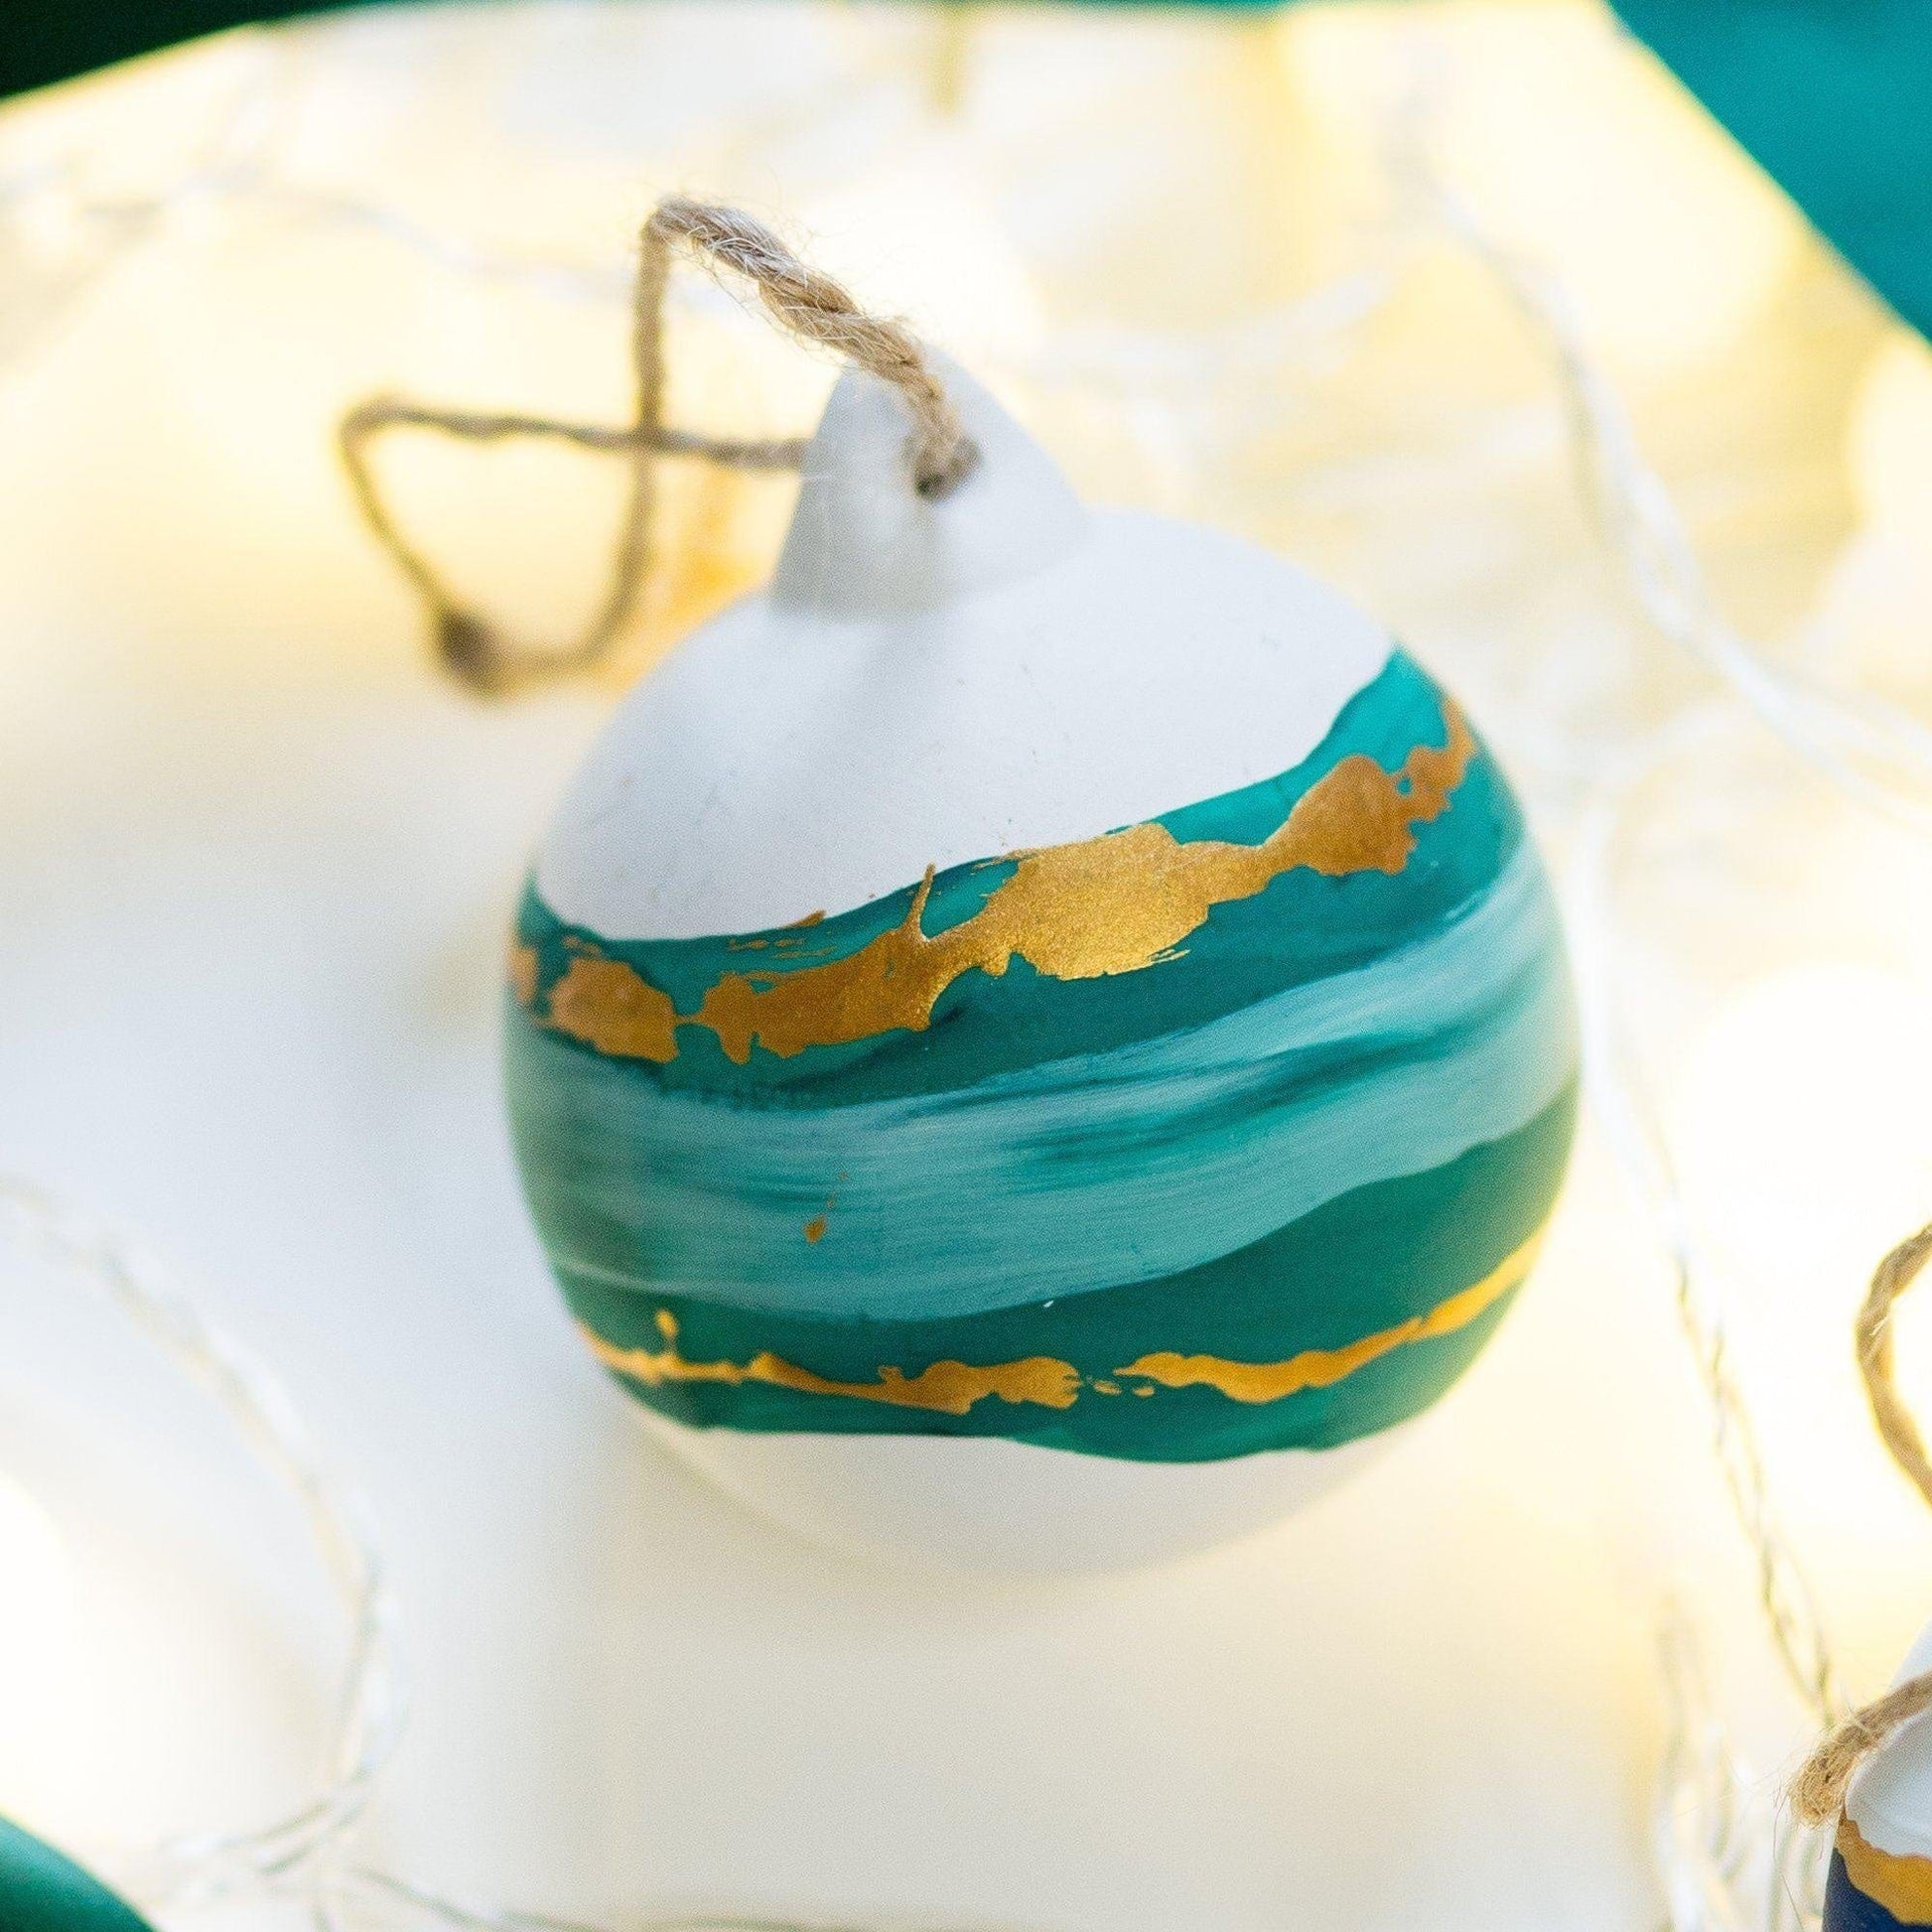 And Hope Designs Baubles Christmas Baubles - nature inspired painted